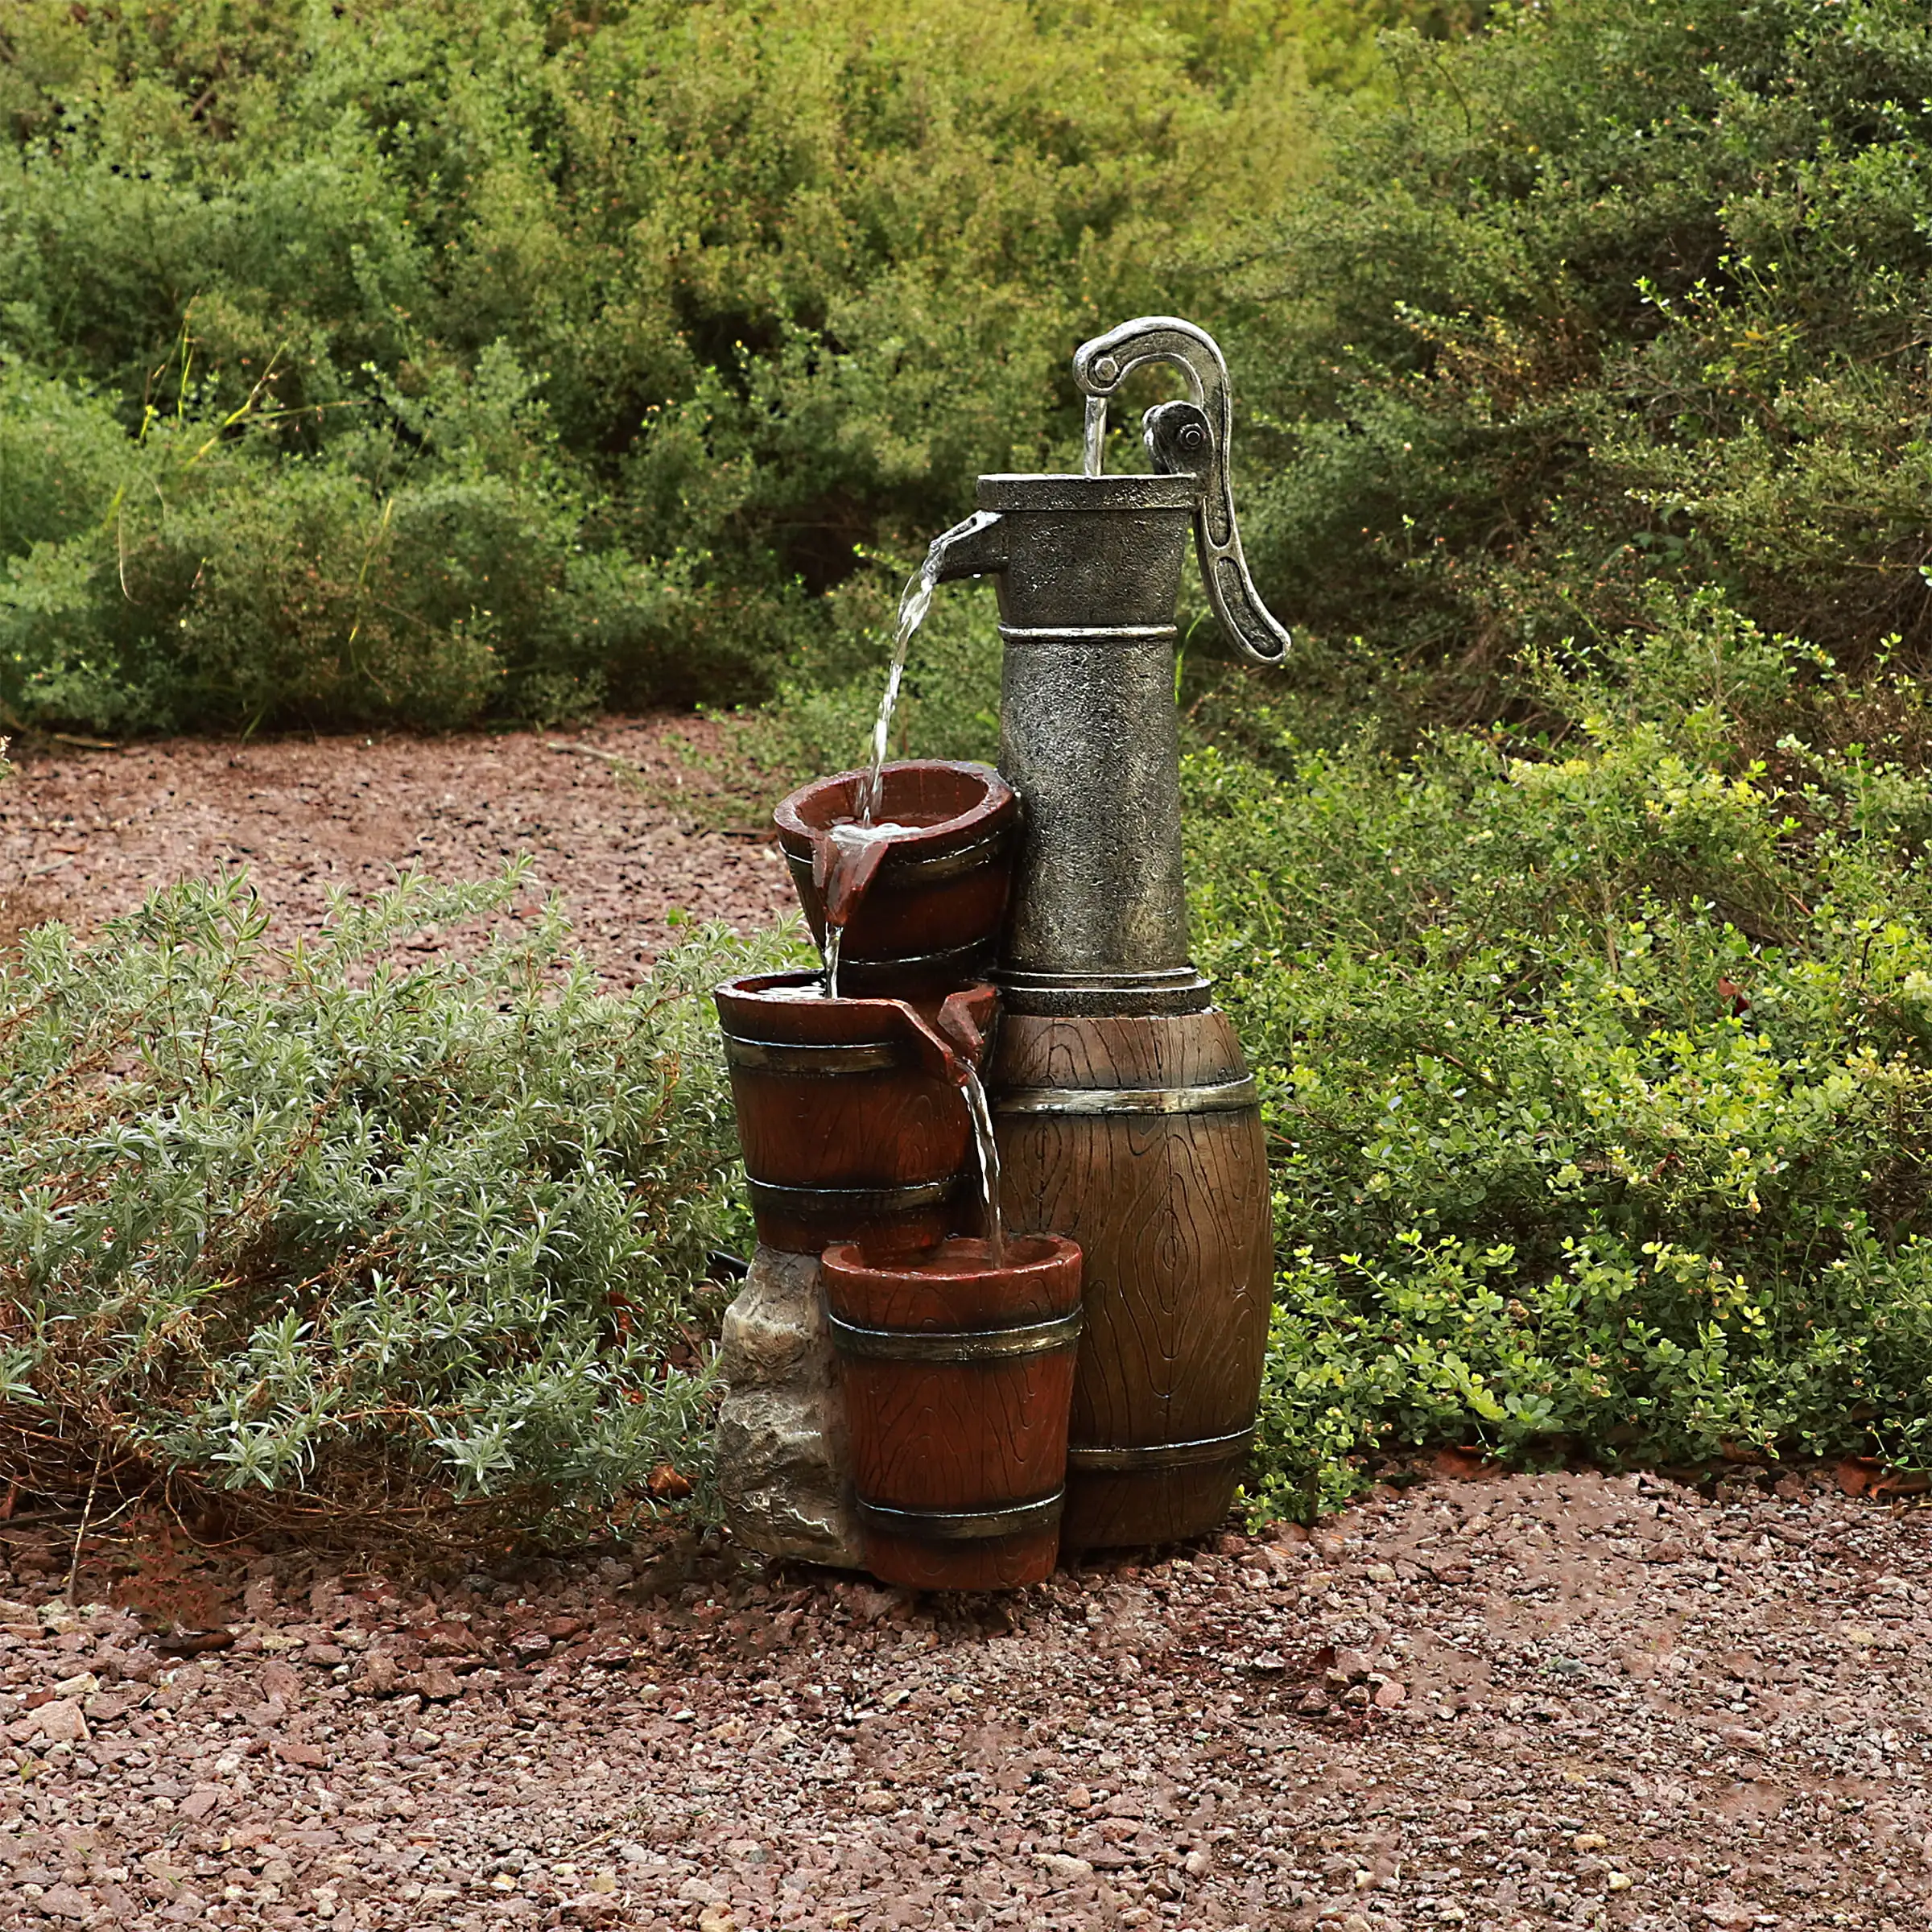 Alpine Corporation Vintage Barrel Water Pump with Buckets Fountain, 24 Inch Tall